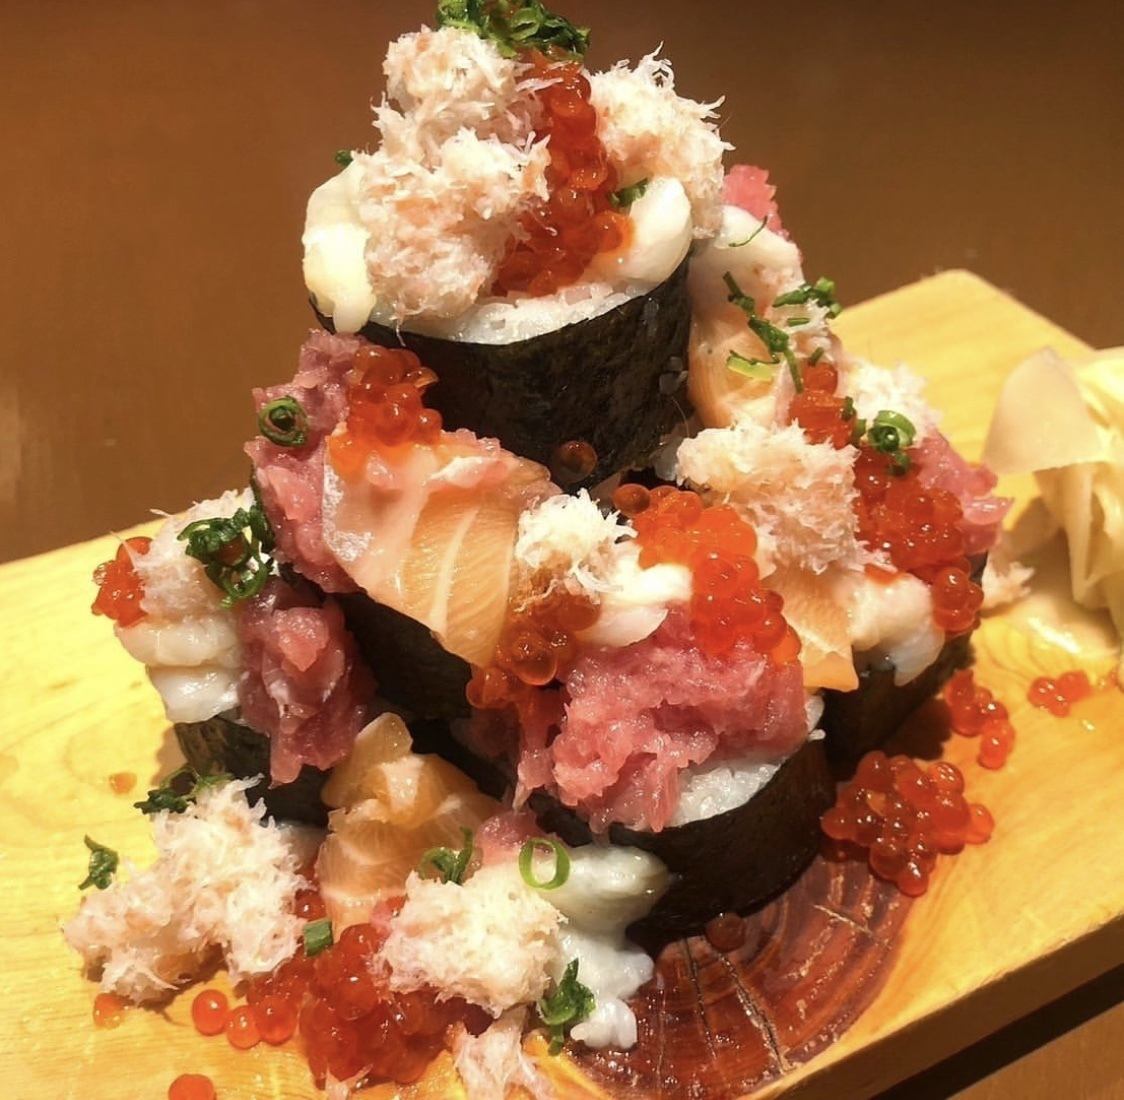 Kiwami spills! Greedy sushi topped with toppings until they spill out♪